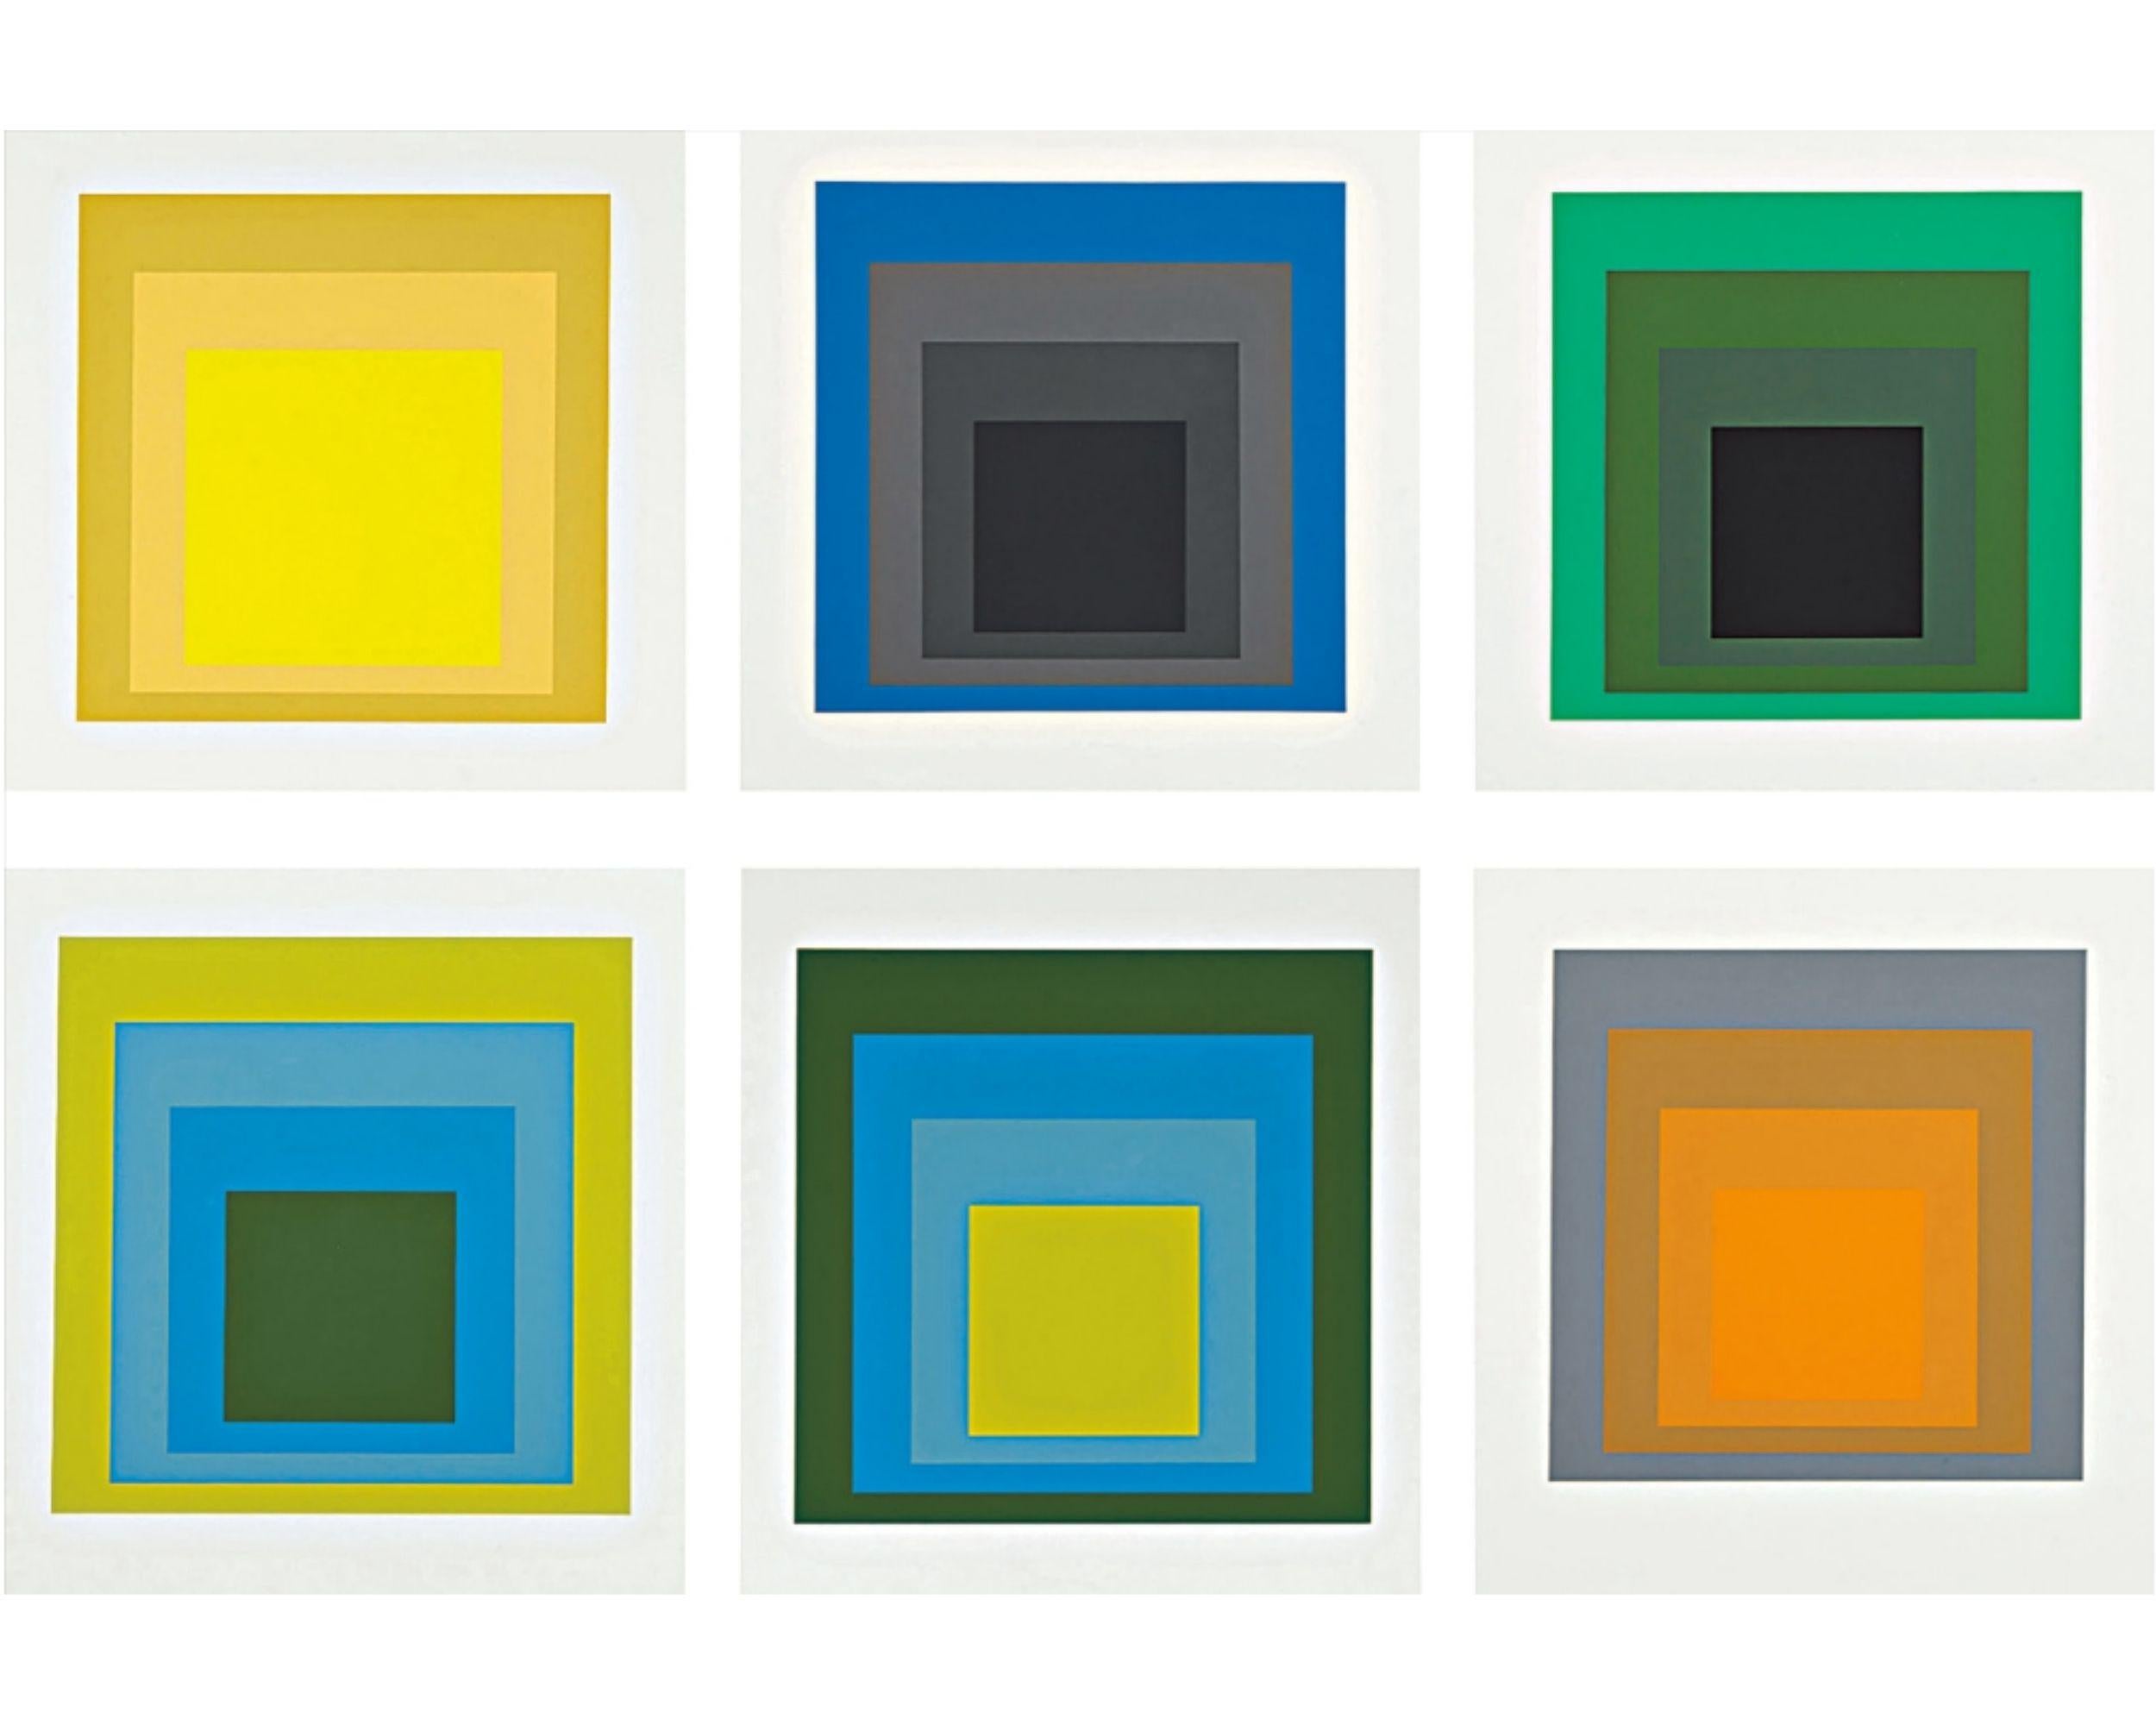 JOSEF ALBERS
Formulation: Articulation I & II, 1972

The complete set of 127 screenprints in colours, on 66 sheets of wove paper, folded (as issued)
Signed and numbered from the edition of 1000 in black ink on the justification
Co-published by Harry